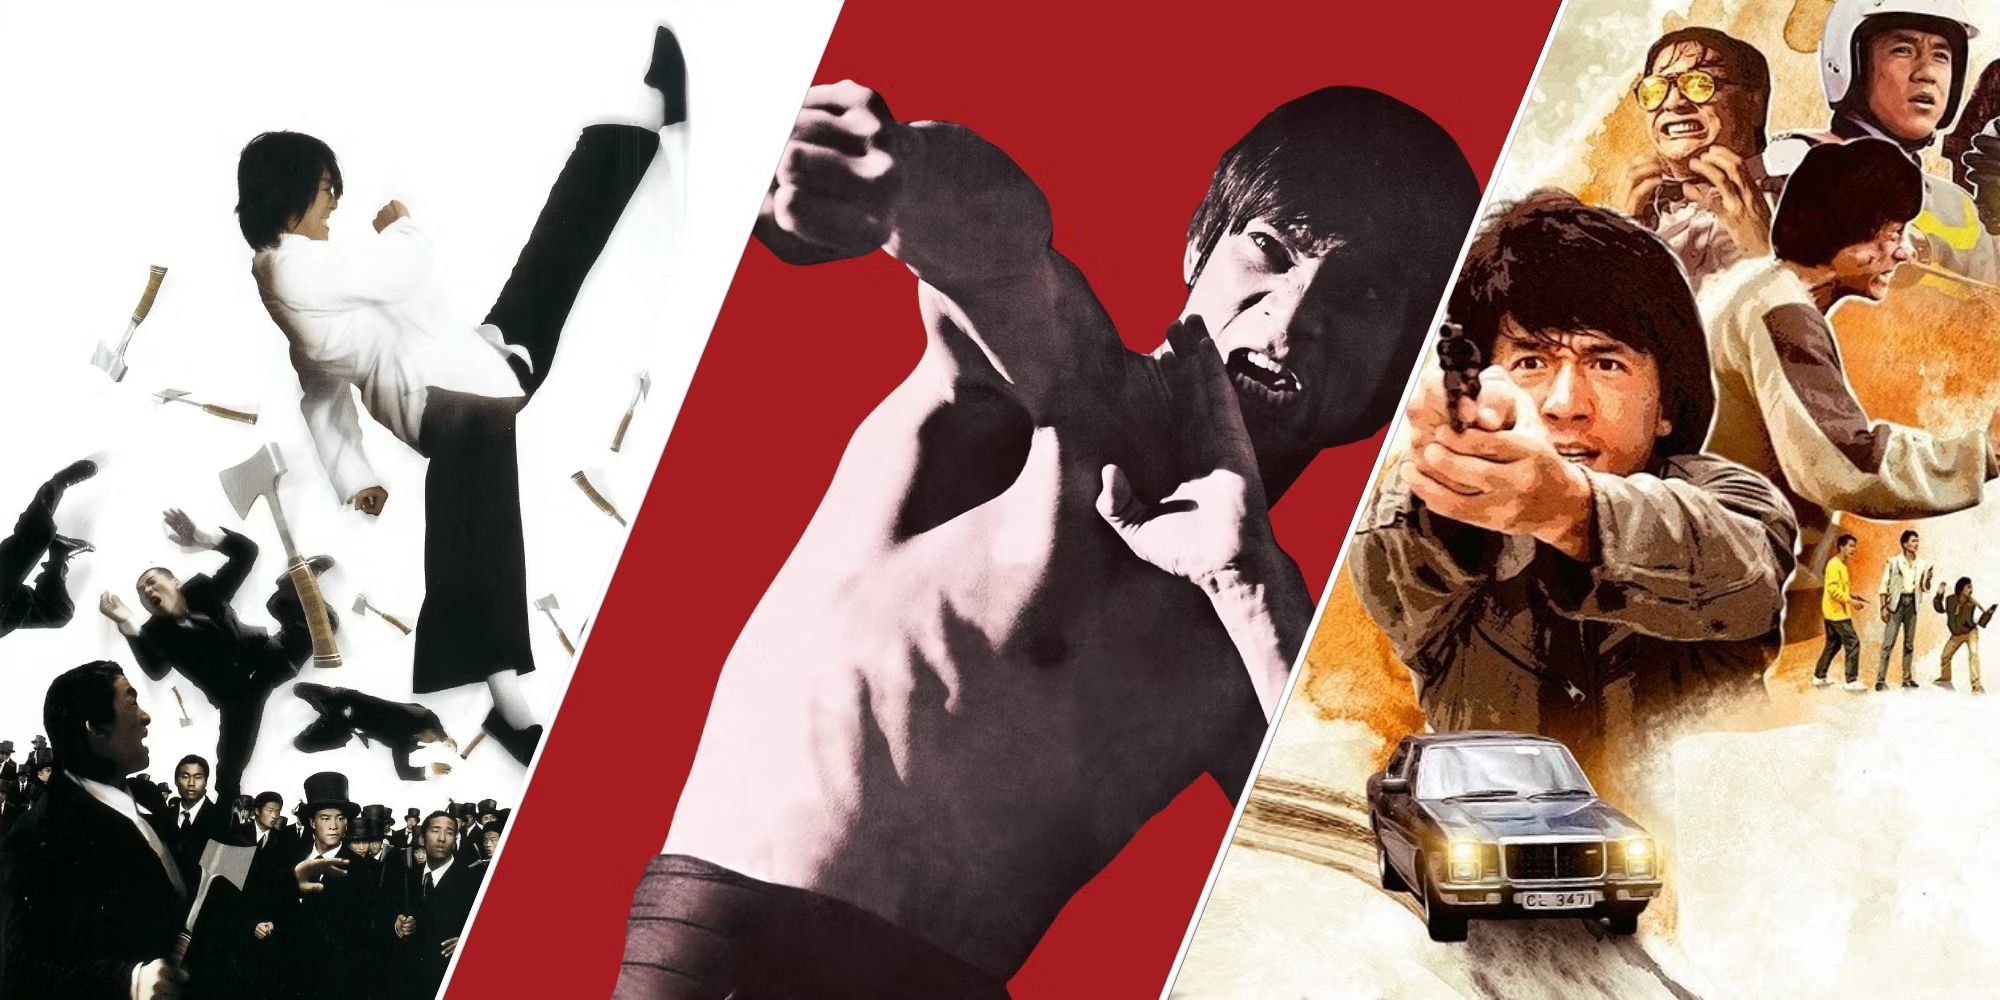 10 Unconventional Martial Arts Movies That Blend Action With Other Genres